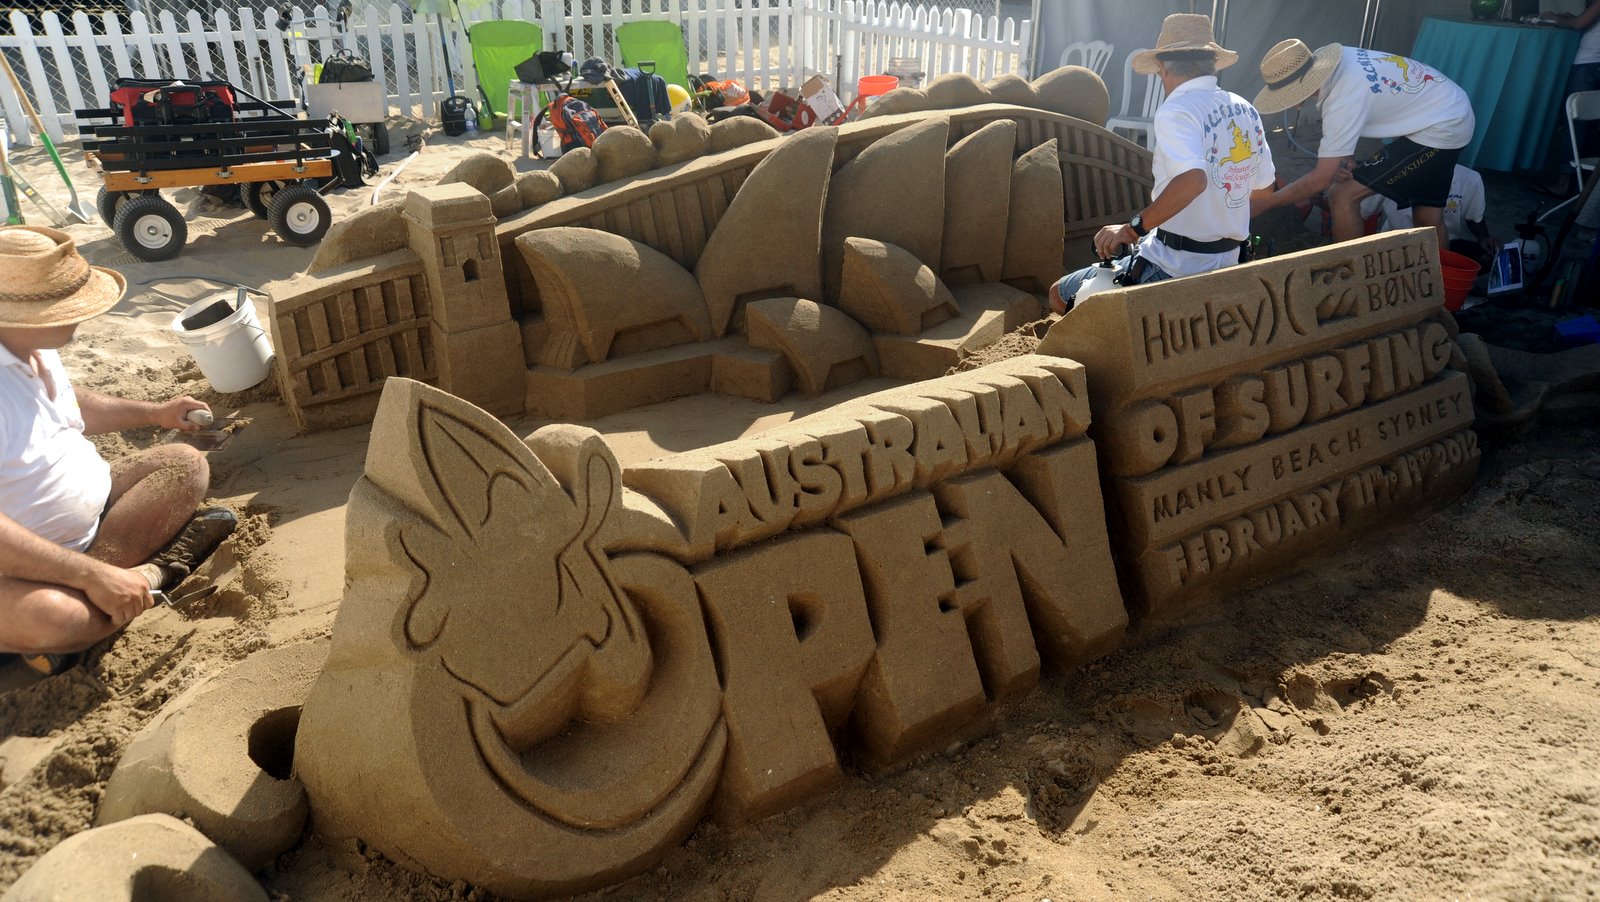 SPONSOR LOGOS AND THEMED SCULPTURE FOR PUBLIC EVENTS